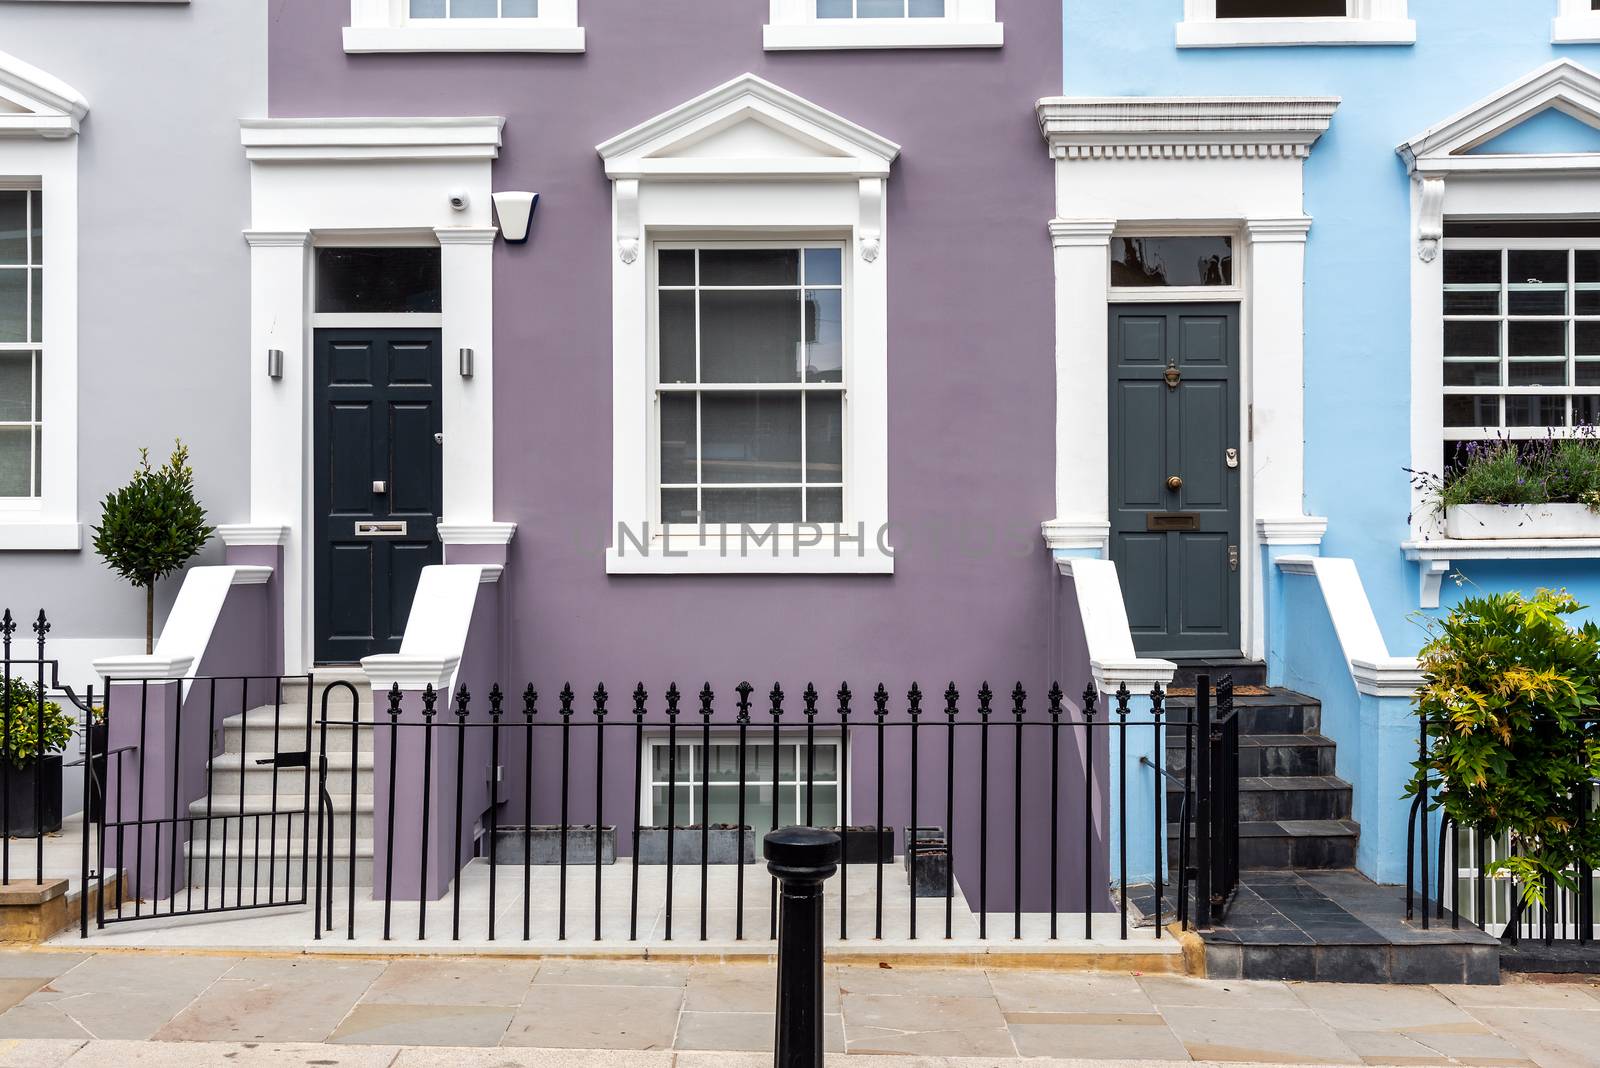 Entrances to some typical english row houses seen in Notting Hill, London